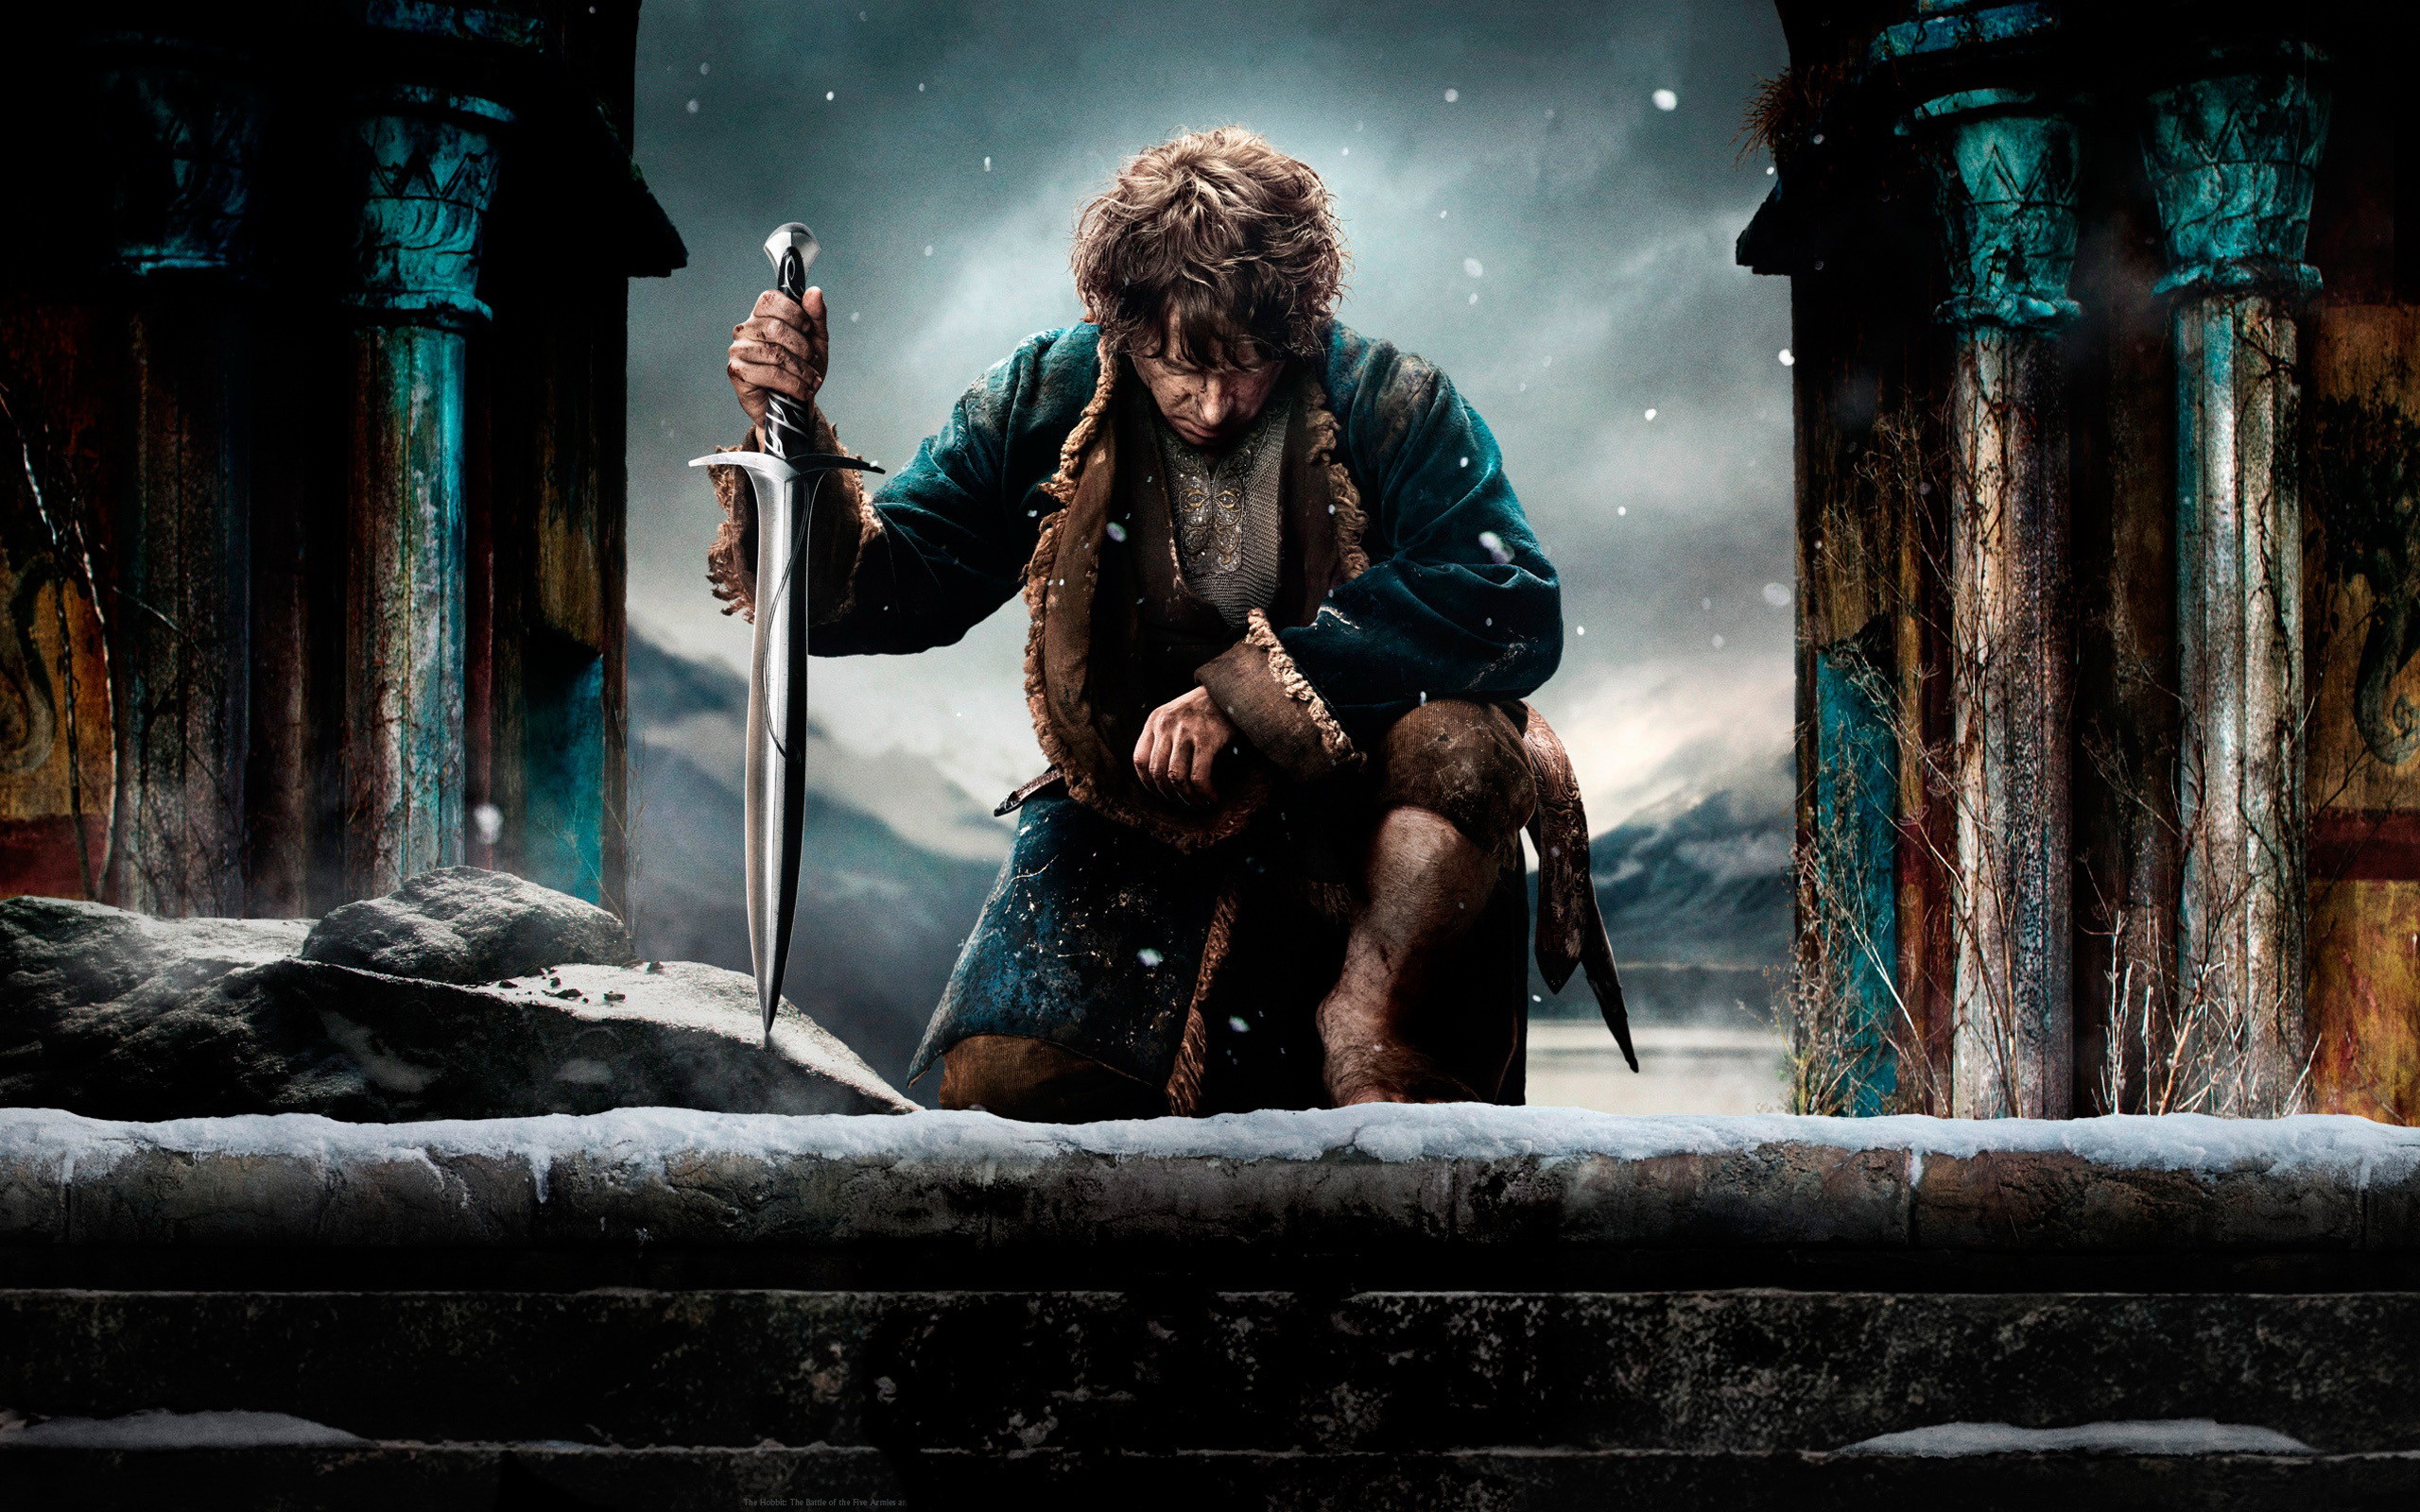 2560x1600 Movie - The Hobbit: The Battle of the Five Armies Wallpaper